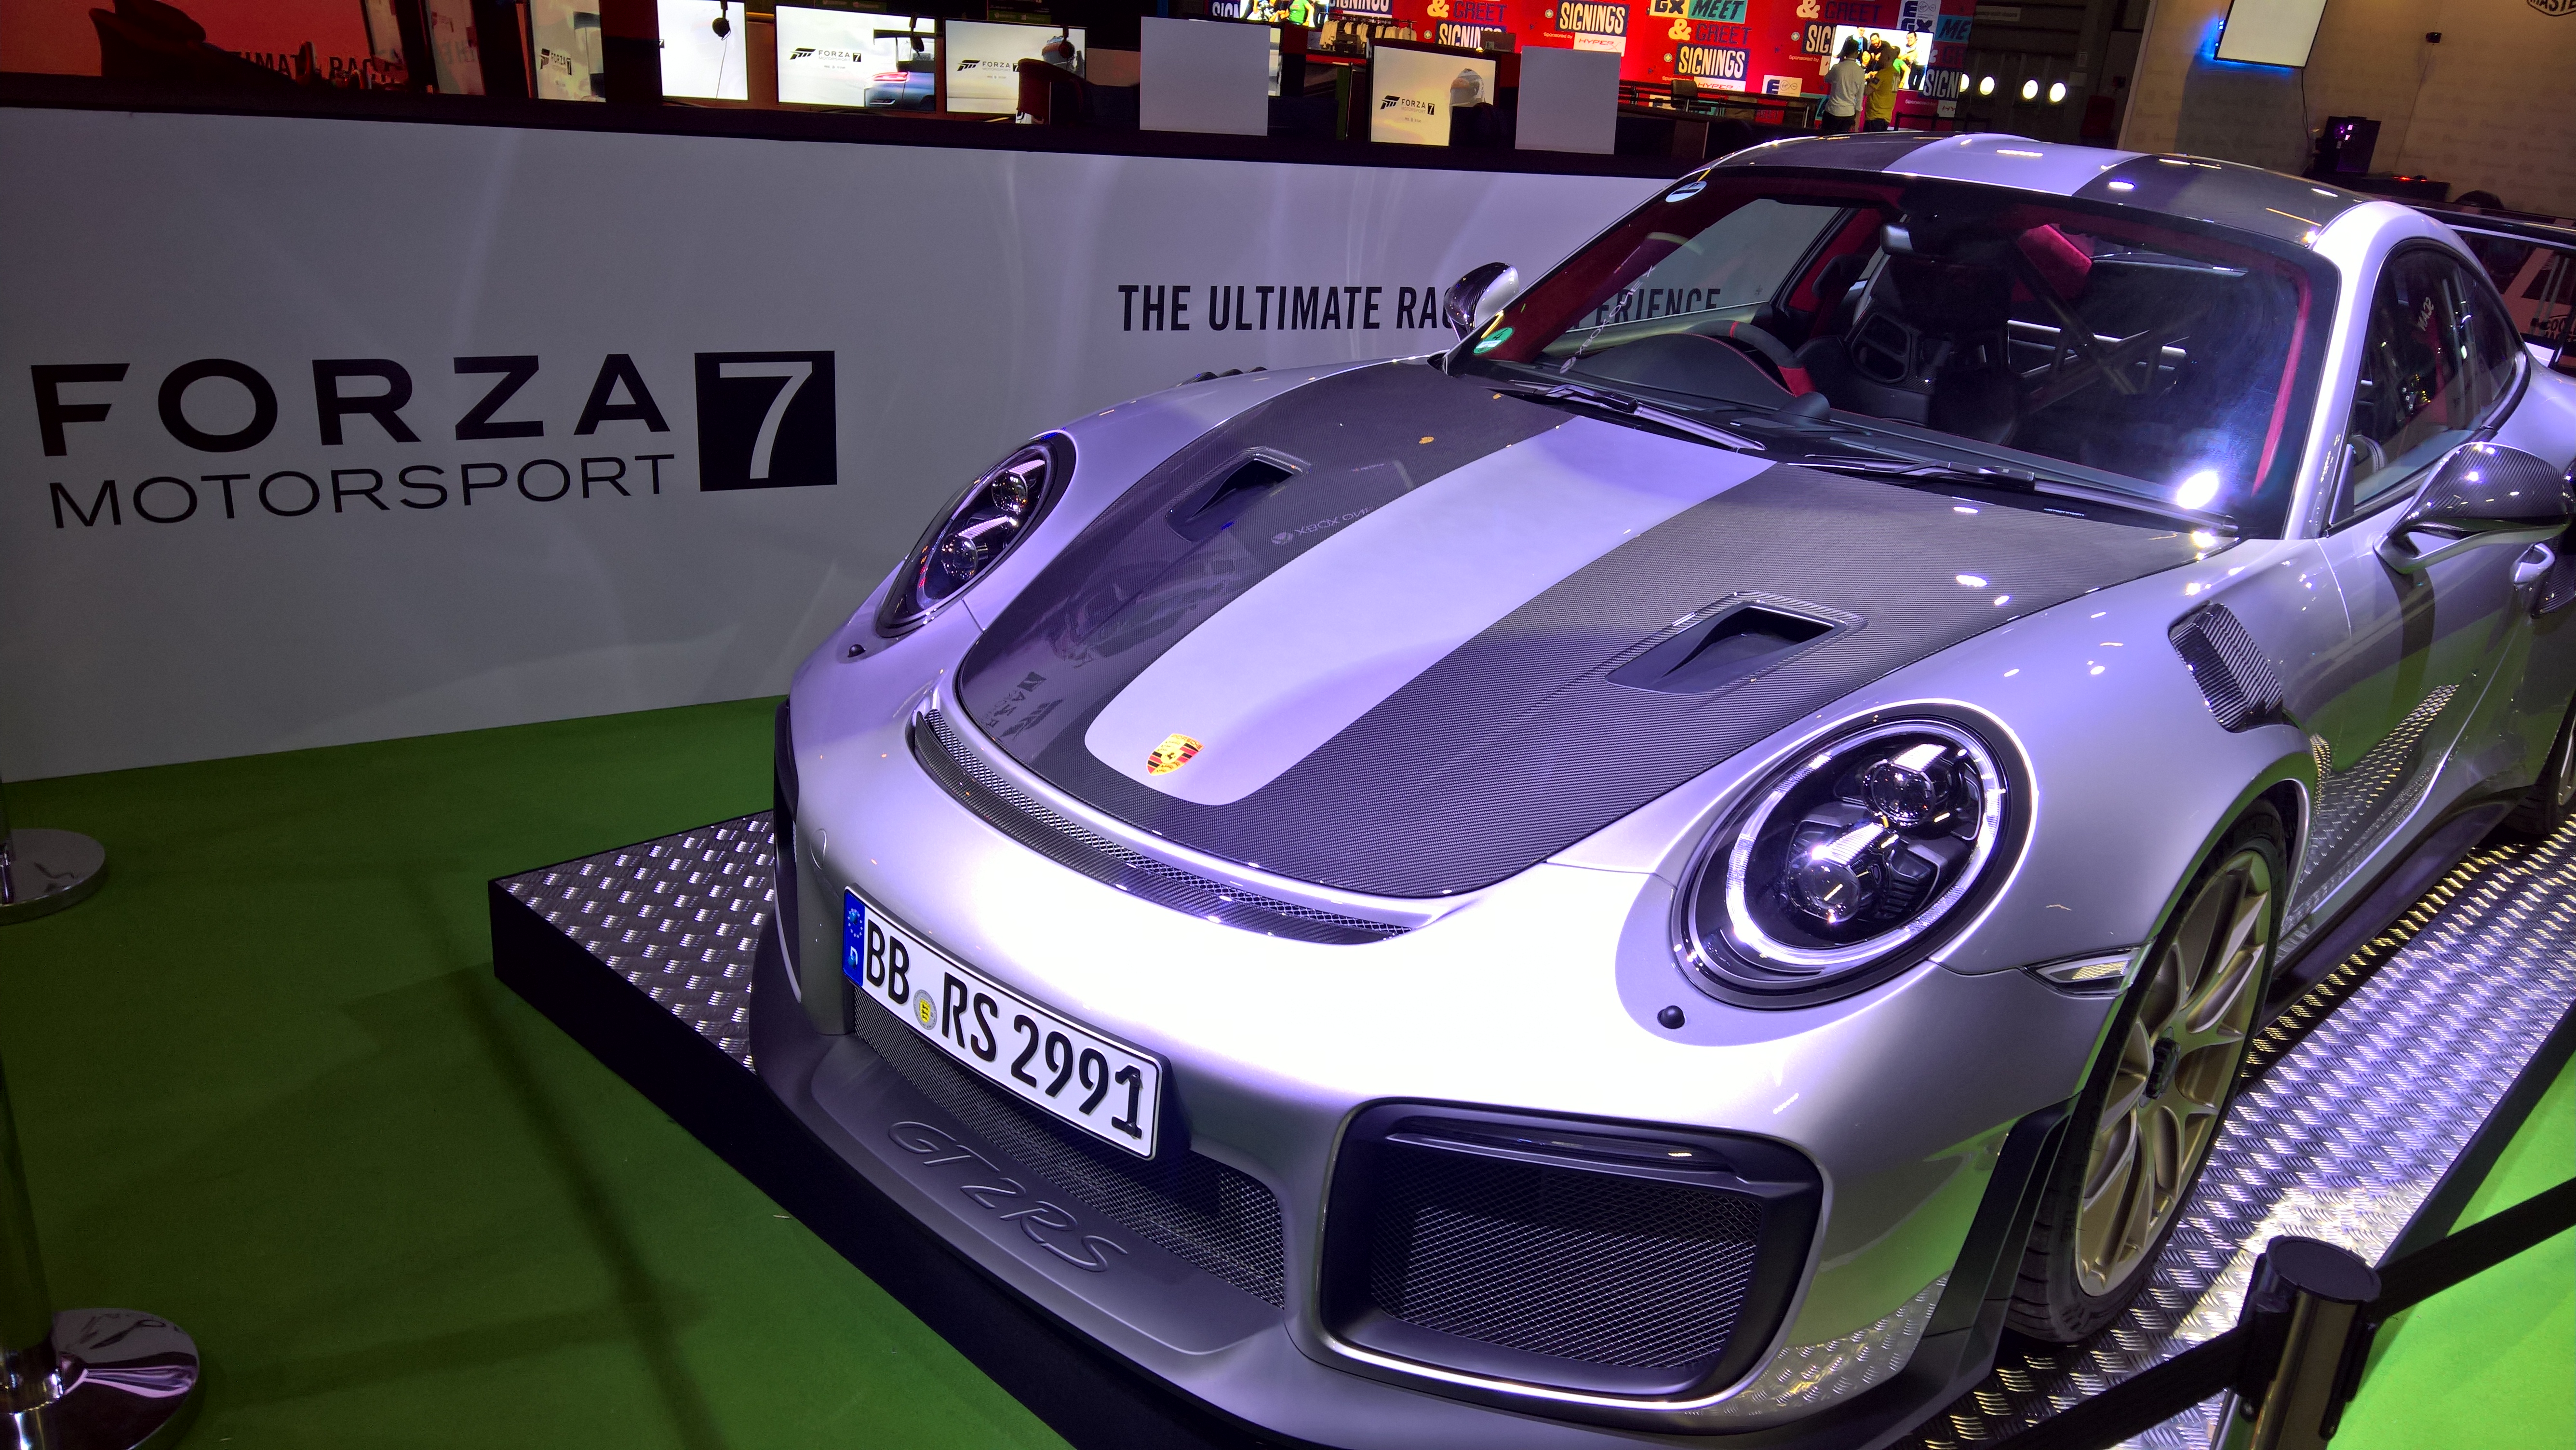 Forza 7 fans can drive this Porsche in the game